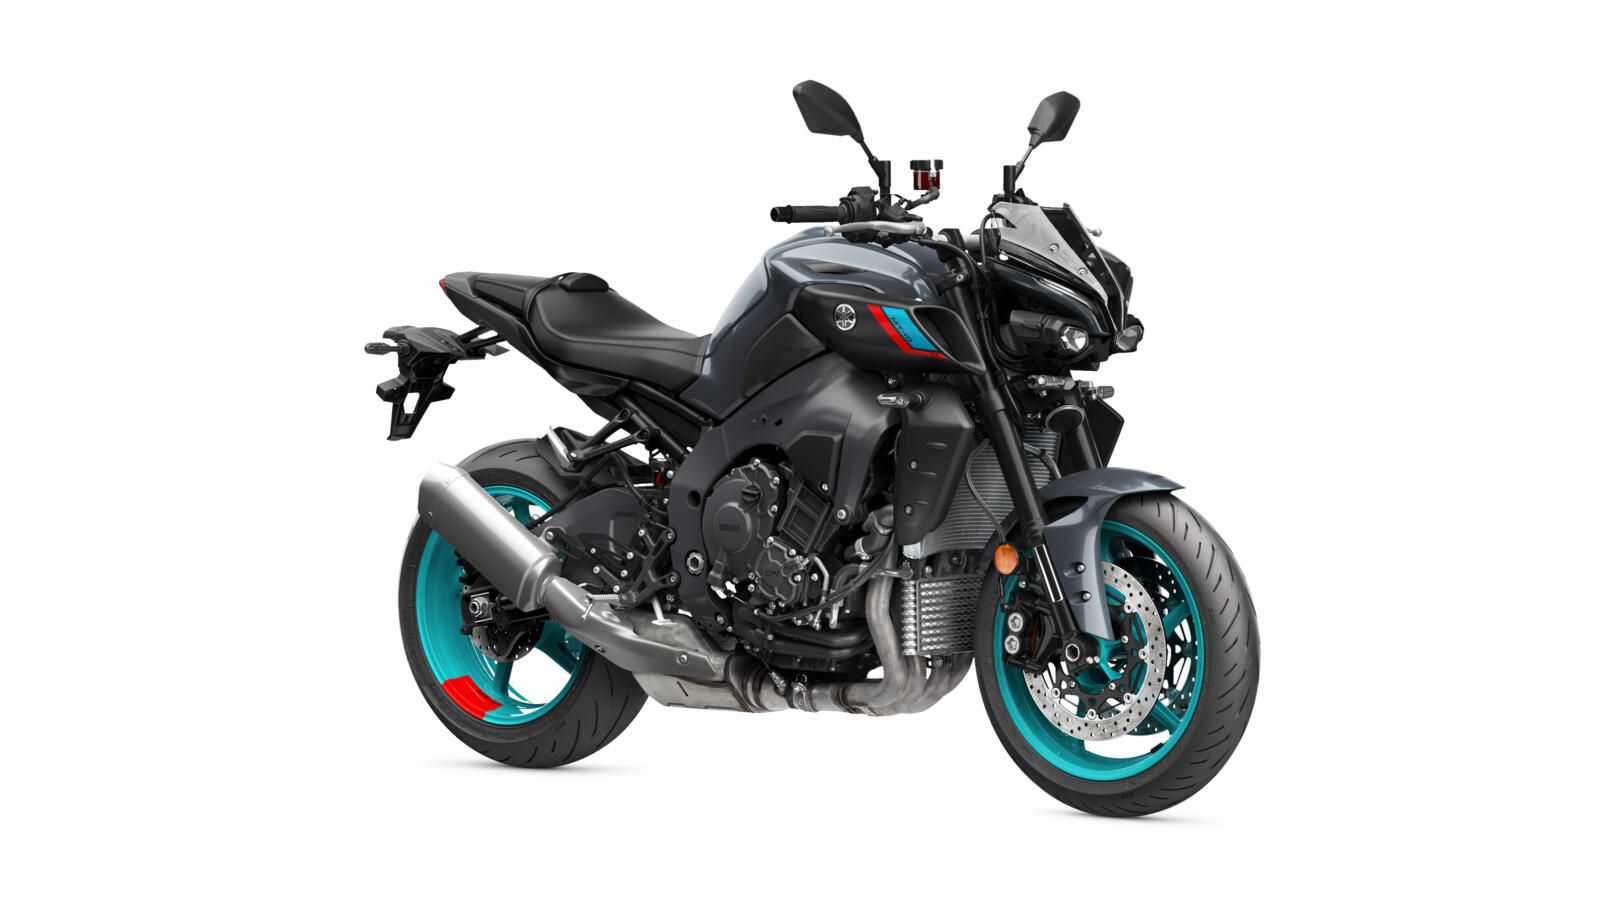 The 2022 Yamaha MT-10 in Cyan Storm colorway.